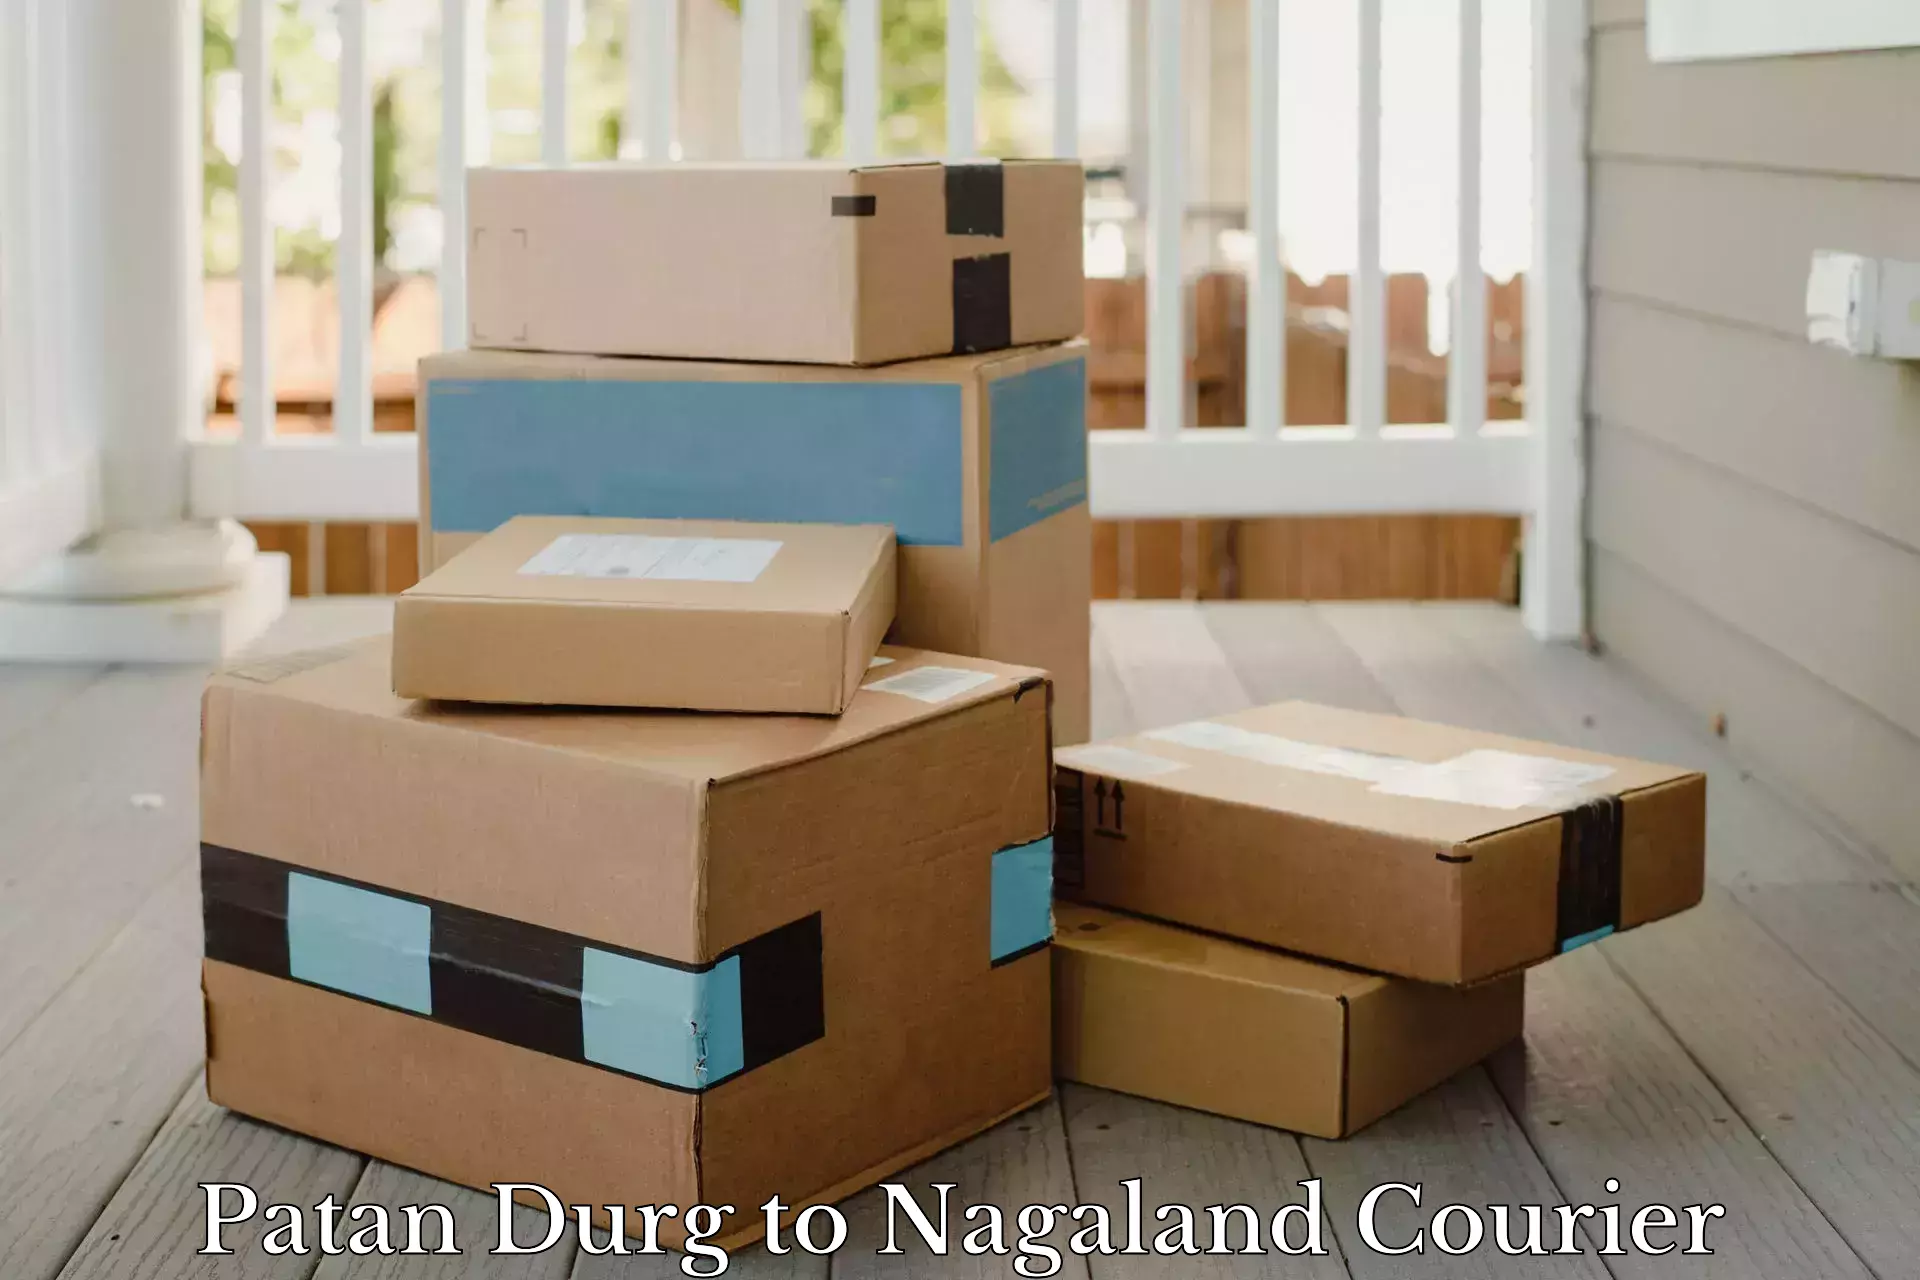 Overnight delivery services Patan Durg to Nagaland